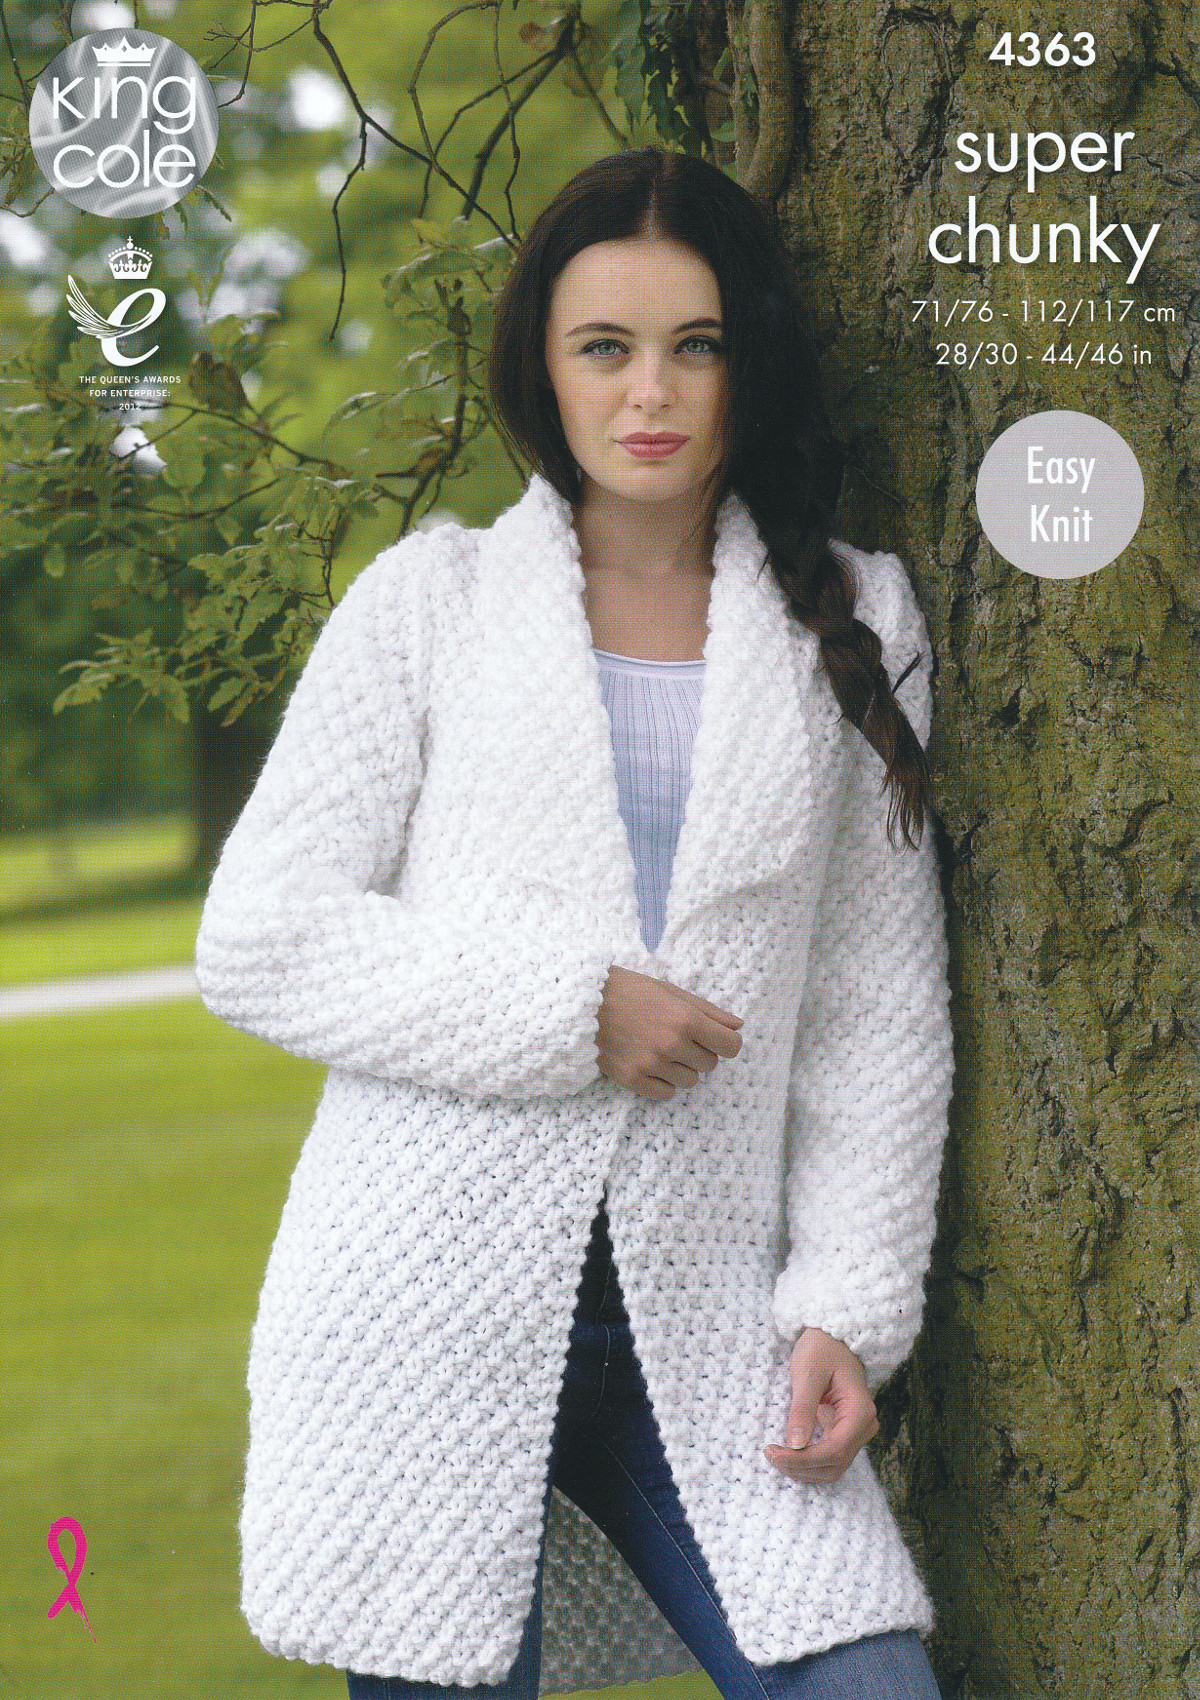 Knit Cardigan Pattern Details About Ladies Super Chunky Knitting Pattern King Cole Easy Knit Sweater Jacket 4363